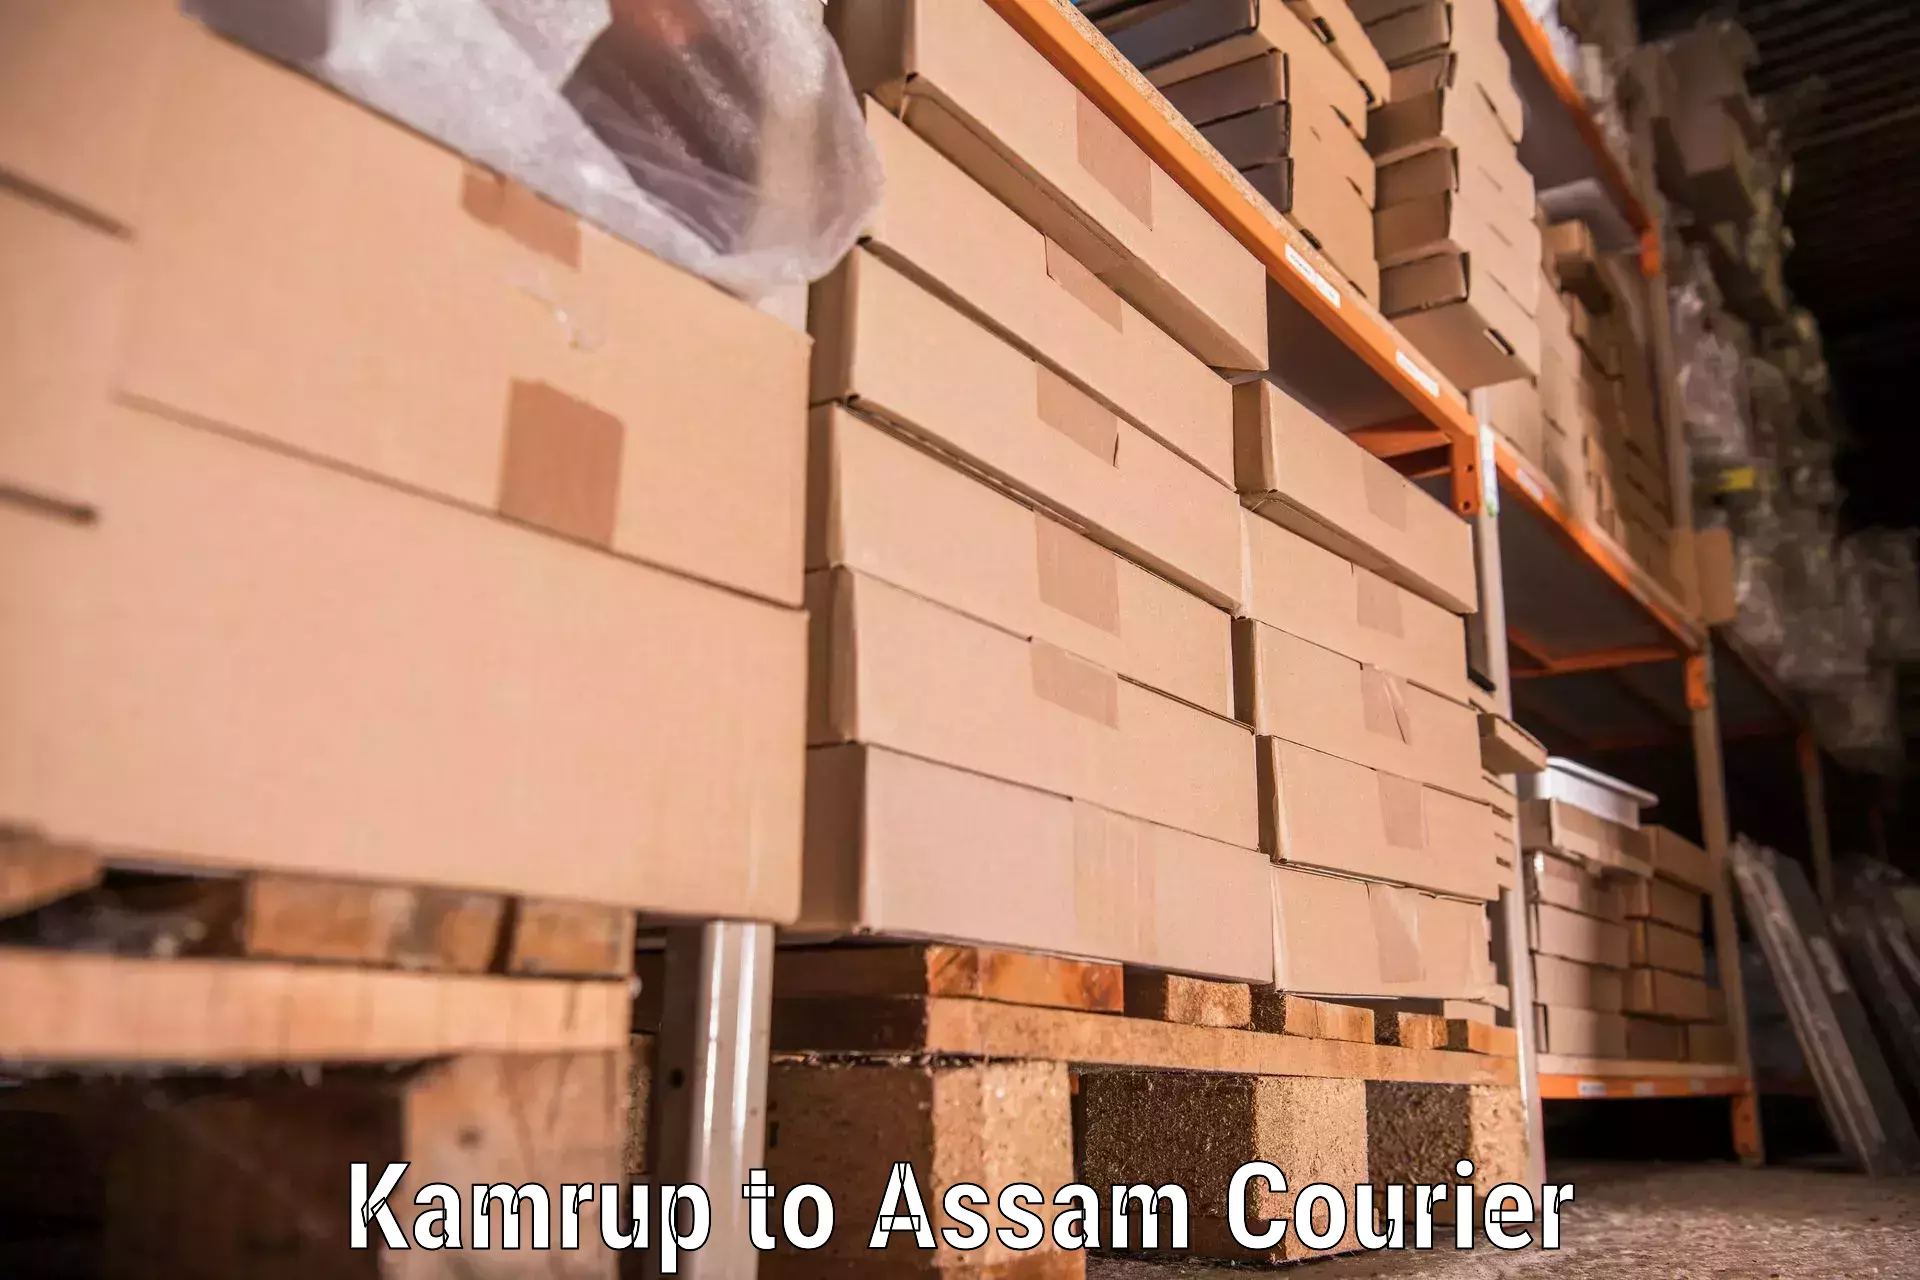 Trusted furniture movers Kamrup to Dibrugarh University